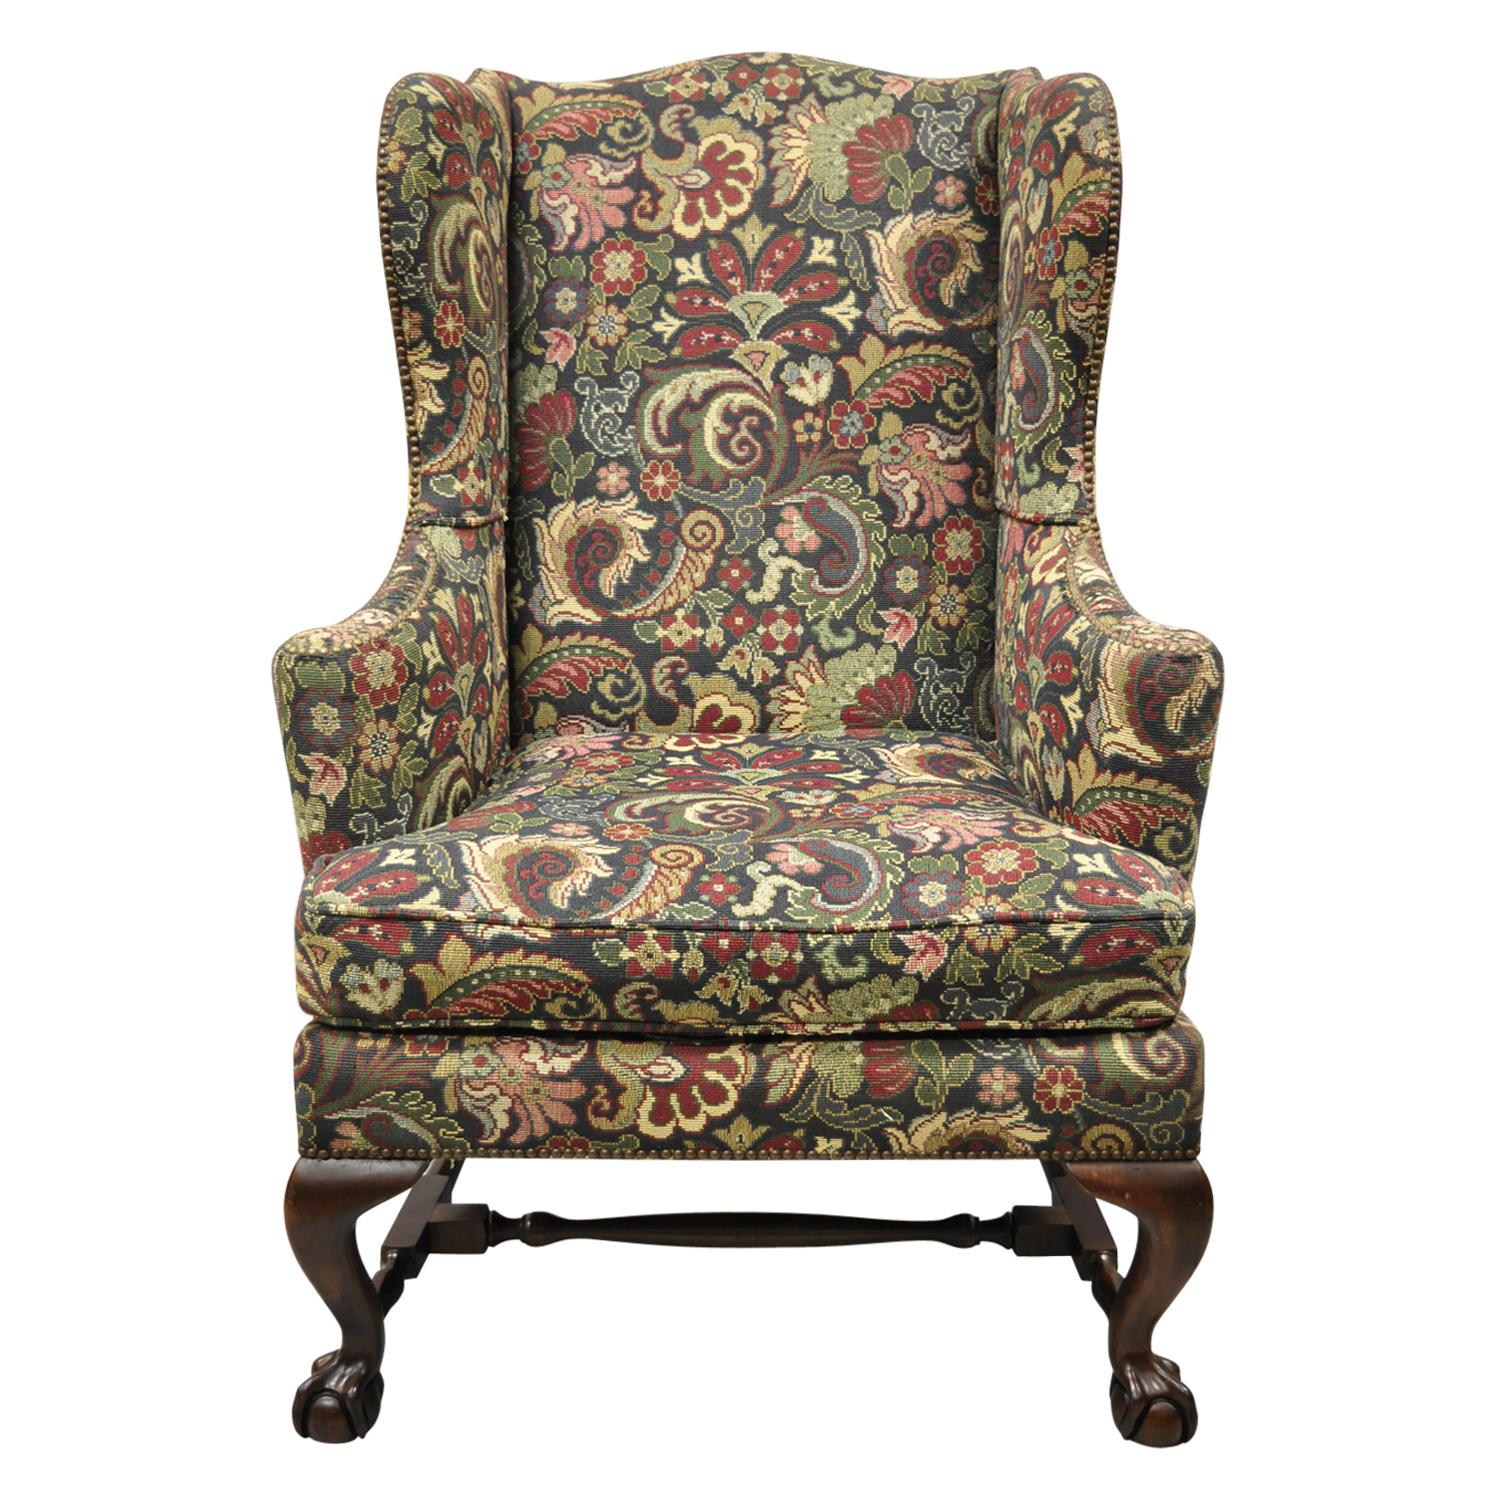 Baker Mahogany Ball and Claw Wingback Lounge Arm Chair Blue Floral Upholstery